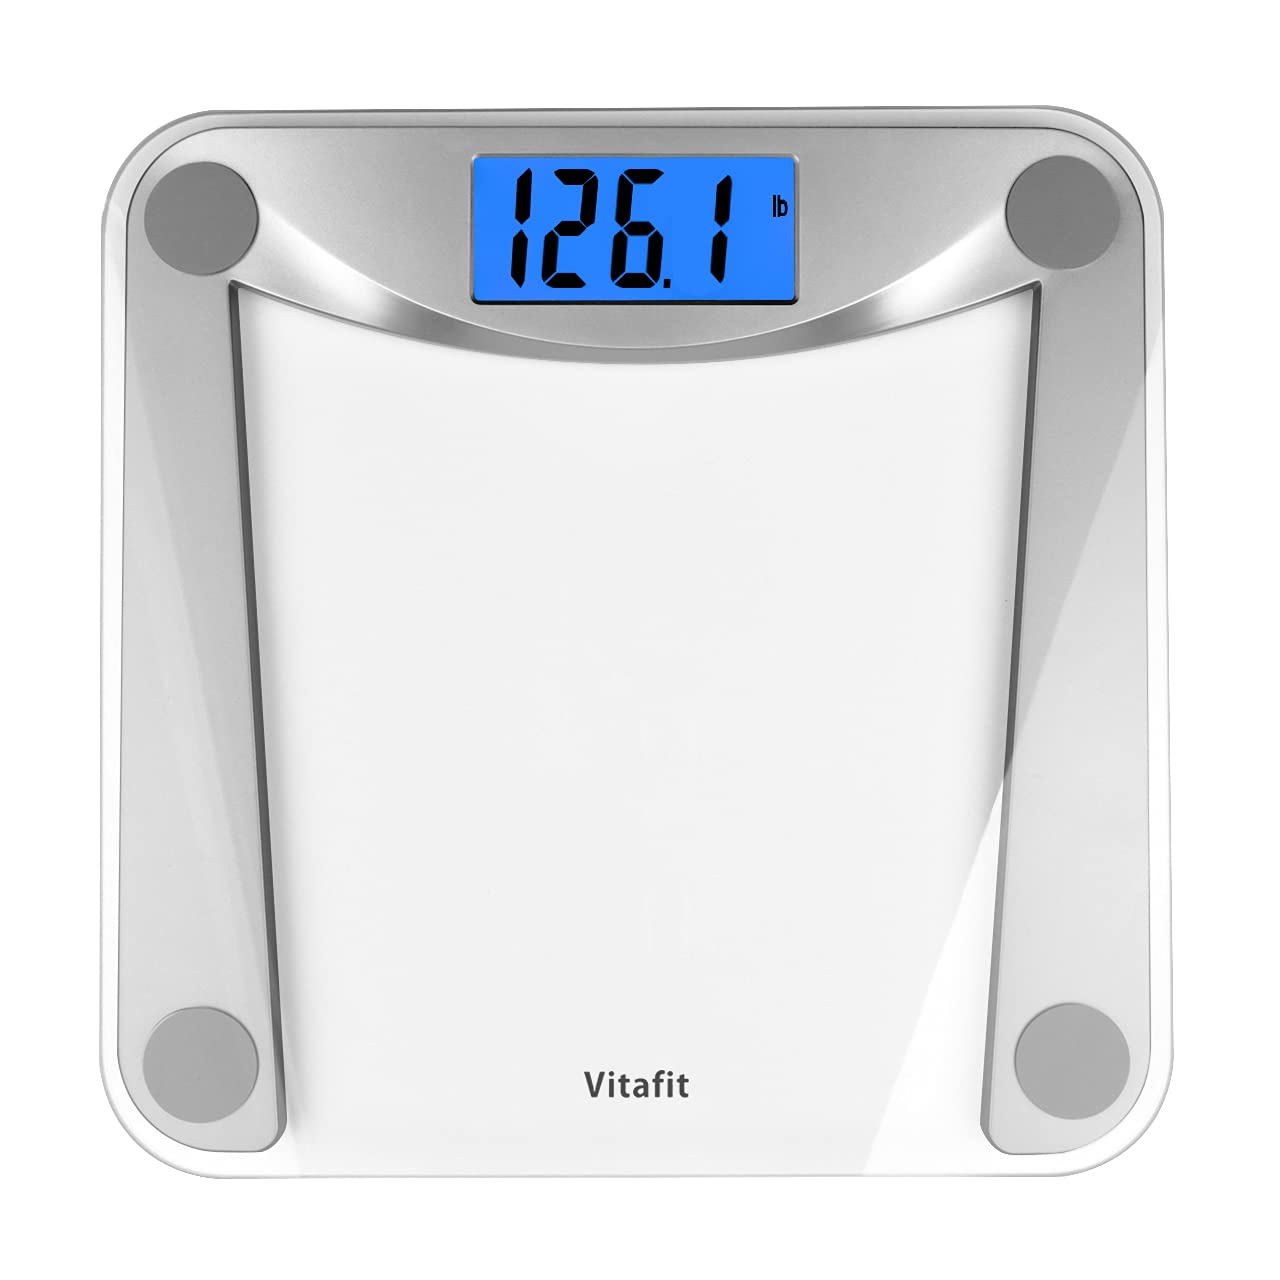 Vitafit Digital Body Weight Bathroom Scale, Focusing on High Precision  Technology for Weighing Over 20 Years, Extra Large Blue Backlit LCD and